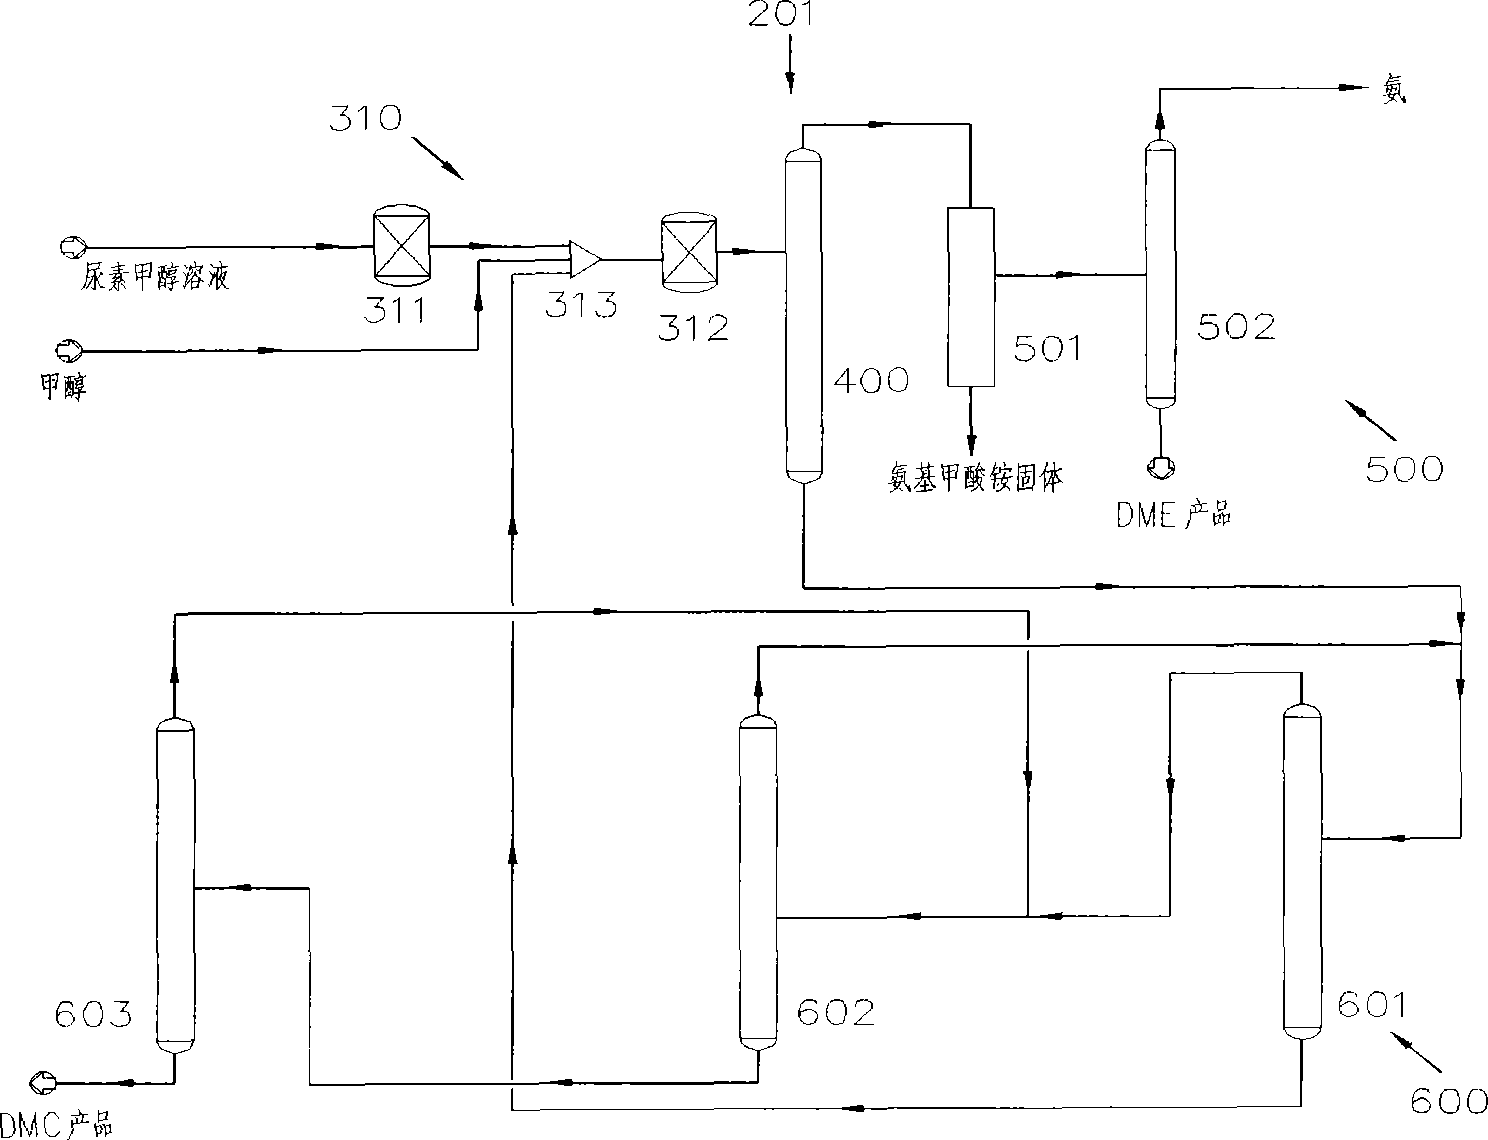 Process for co-producing dimethyl carbonate and dimethyl ether by urea alcoholysis method